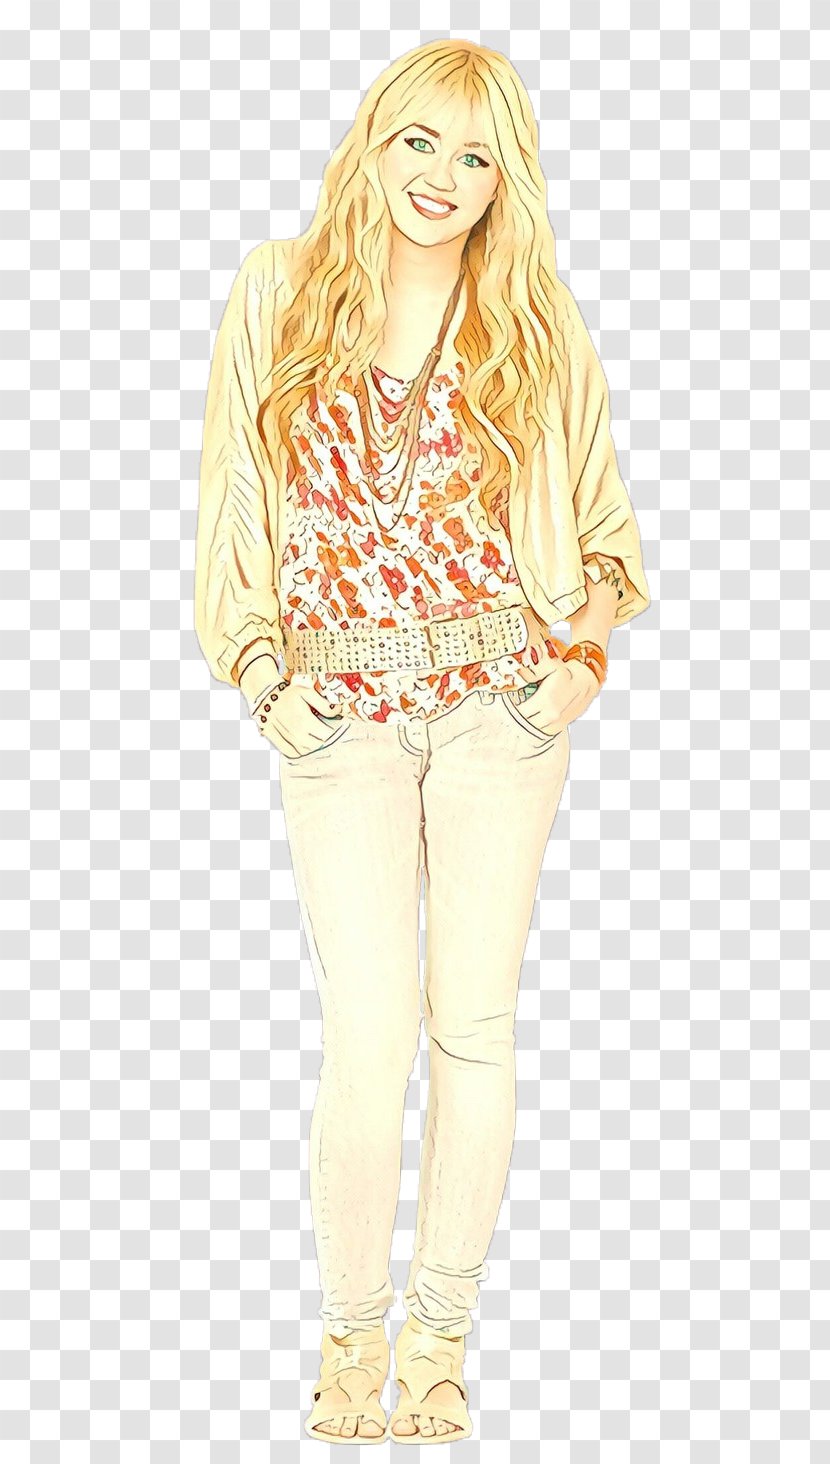 Clothing Yellow Outerwear Blouse Sleeve - Neck Fashion Illustration Transparent PNG